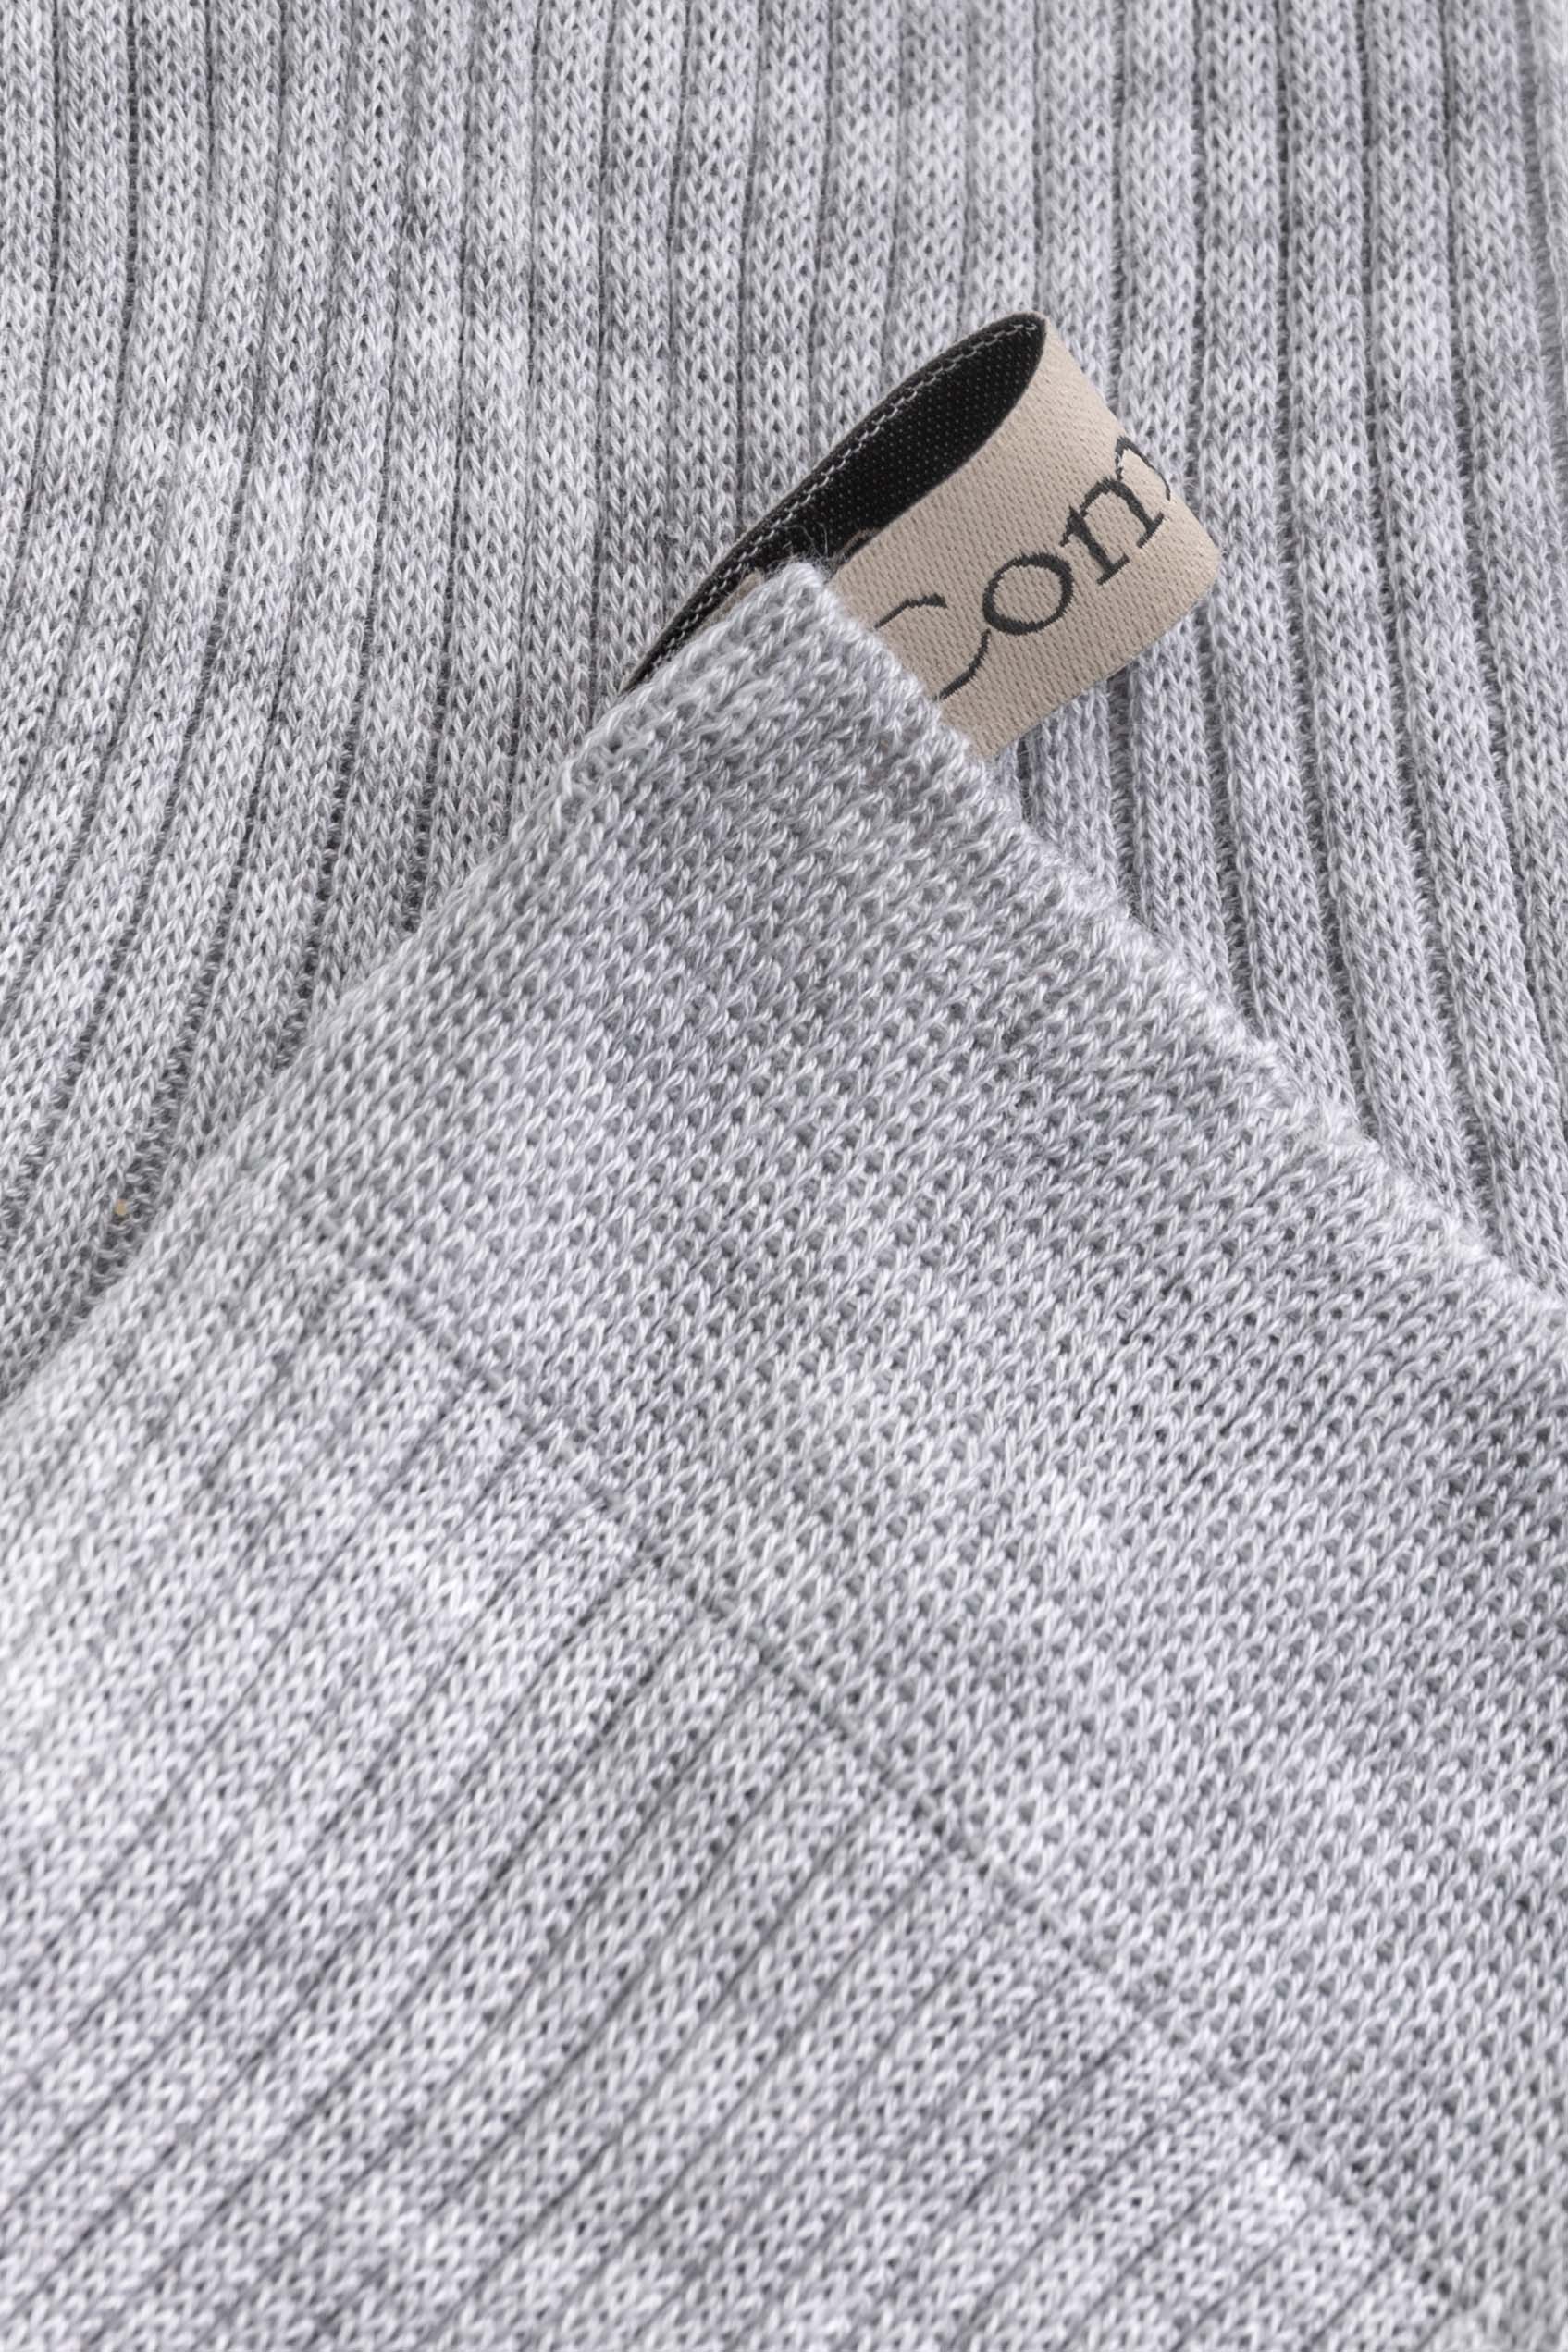 Ribbon Tag Detail, The Agnelli Sock in Light Heather Grey, Egyptian Cotton